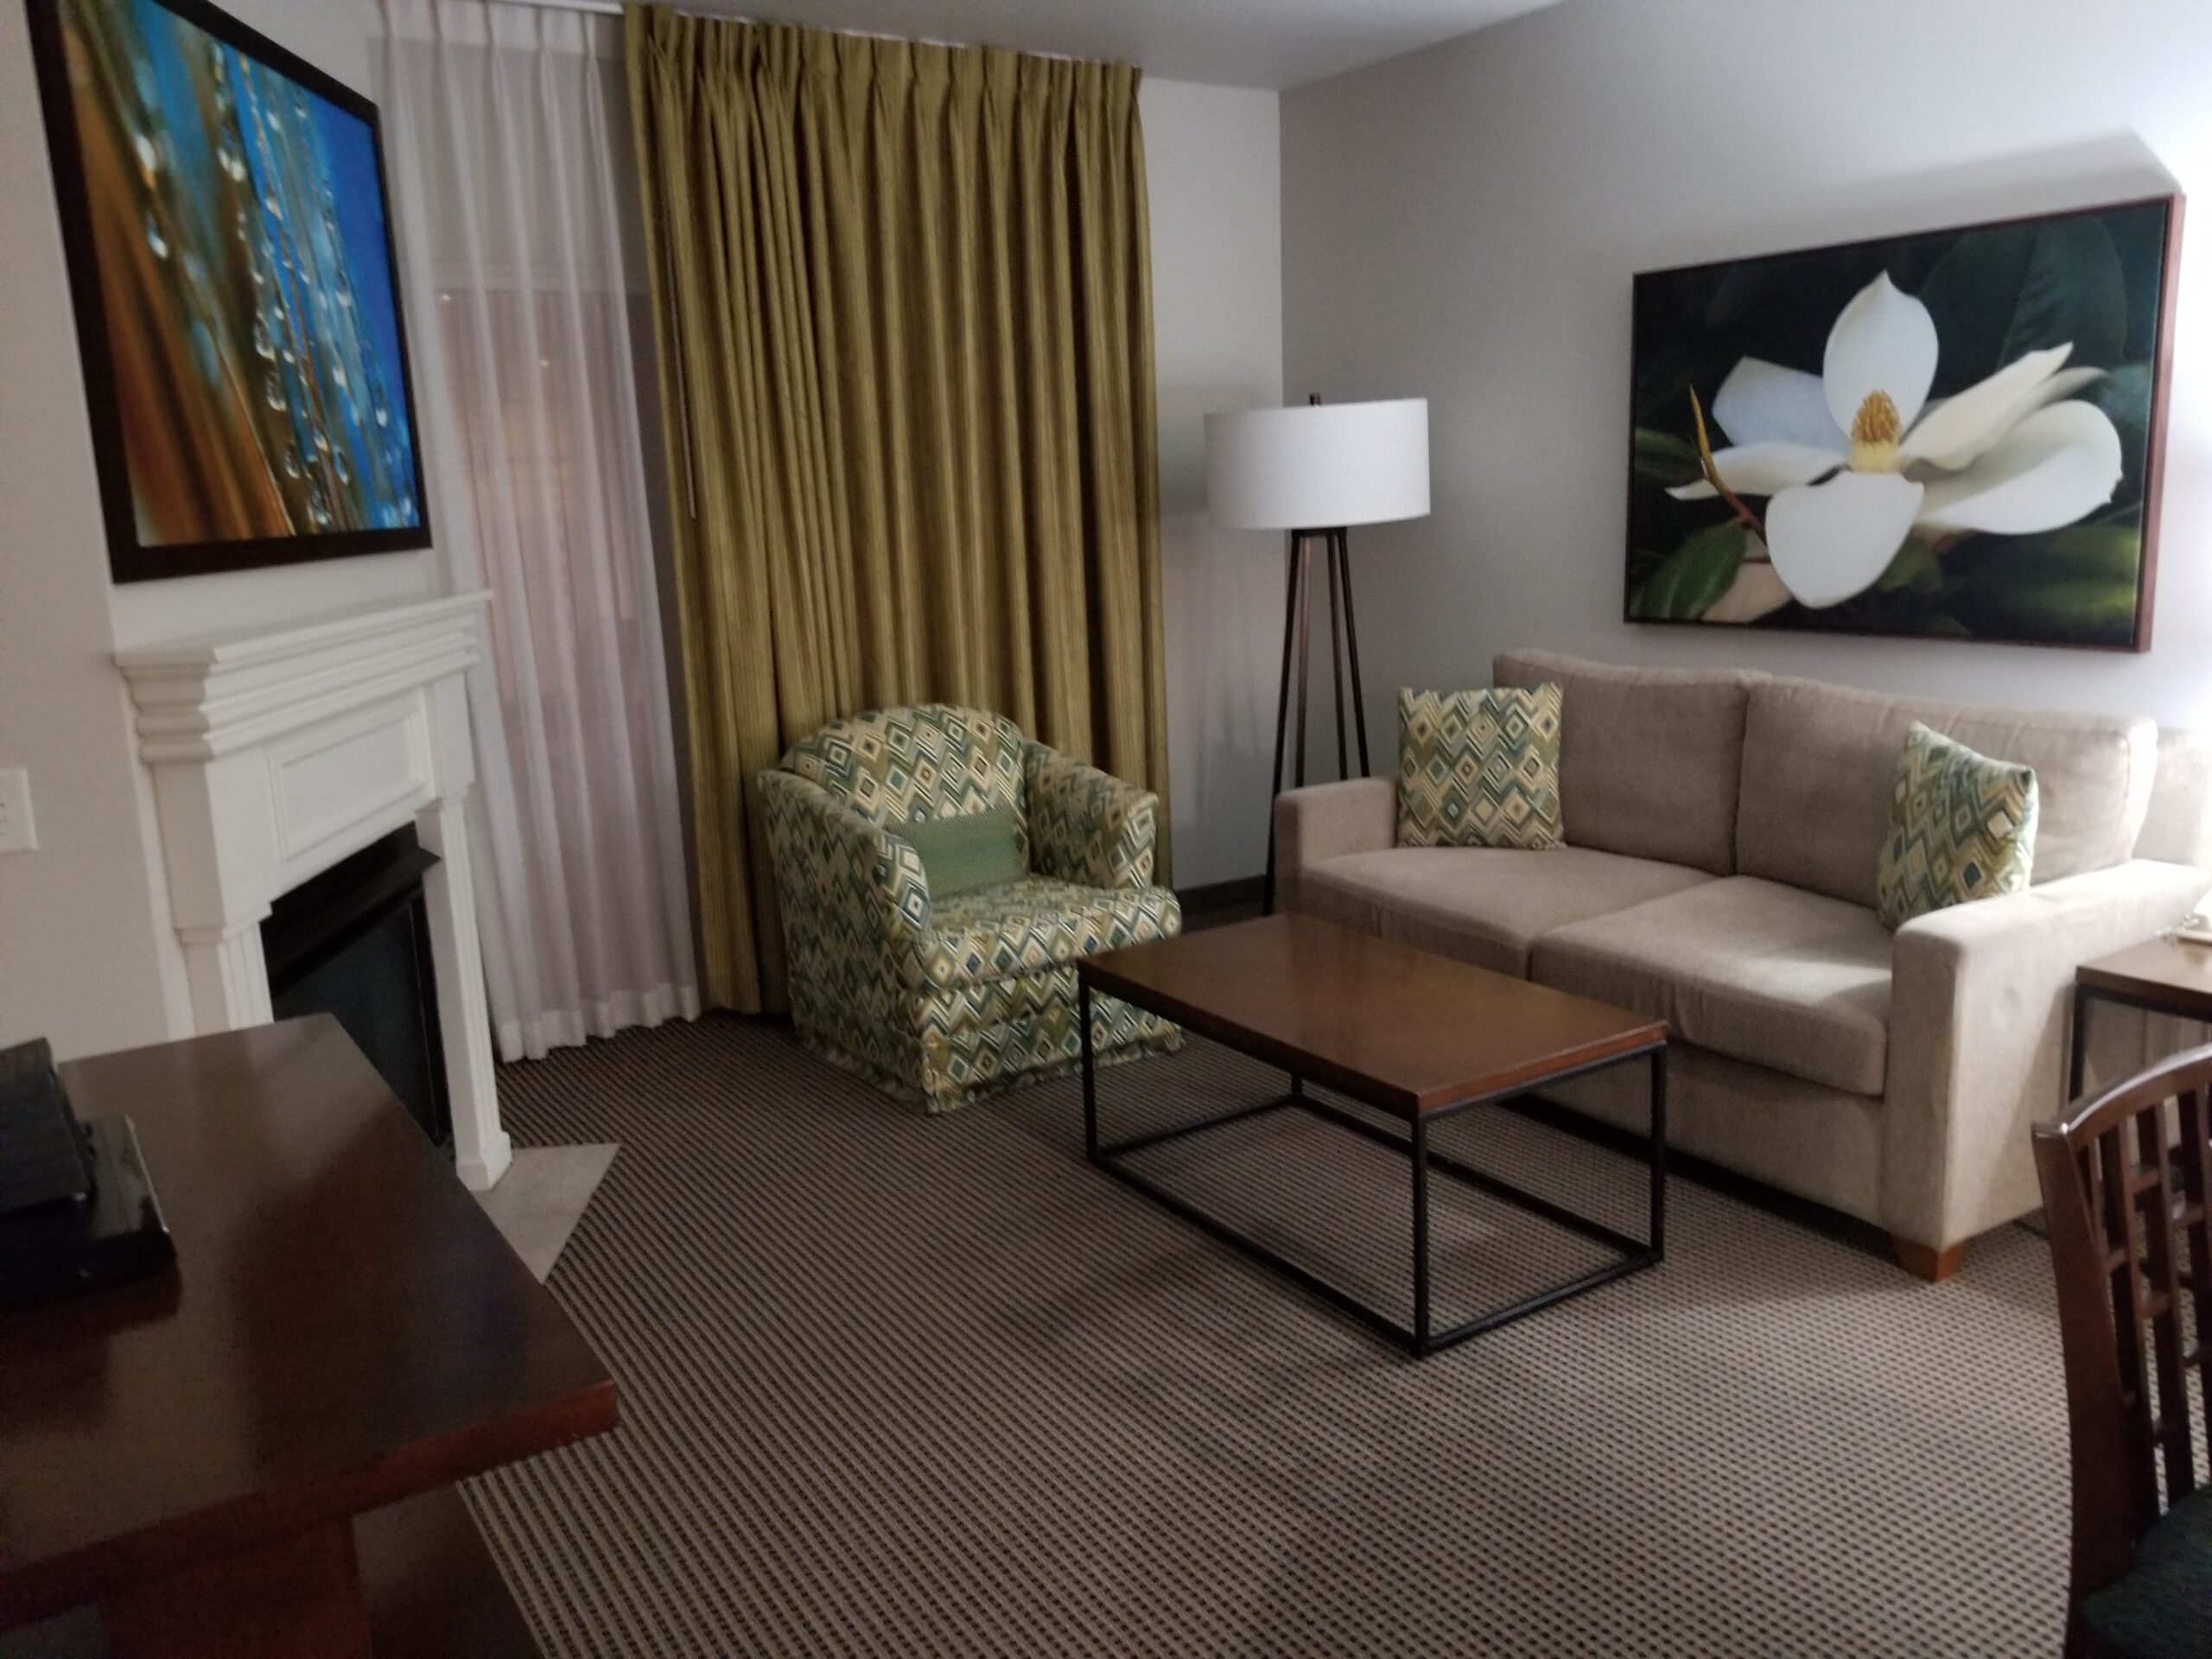 This photo features the living room area in a suite at the Tahiti resort on Tropicana Boulevard in Las Vegas. It has light brown carpet, a dark brown wooden desk on the left wall, a cream colored couch and painting of a white flower on the left wall, a coffee table with a wooden top and a black metal frame underneath, a cushioned chair against the gold curtain on the back wall. There is a white curtain stretched all the way across the window and behind the gold curtain which separates the living room from the balcony. there is also a gas fireplace with a white mantel on the left wall and a painting above that.